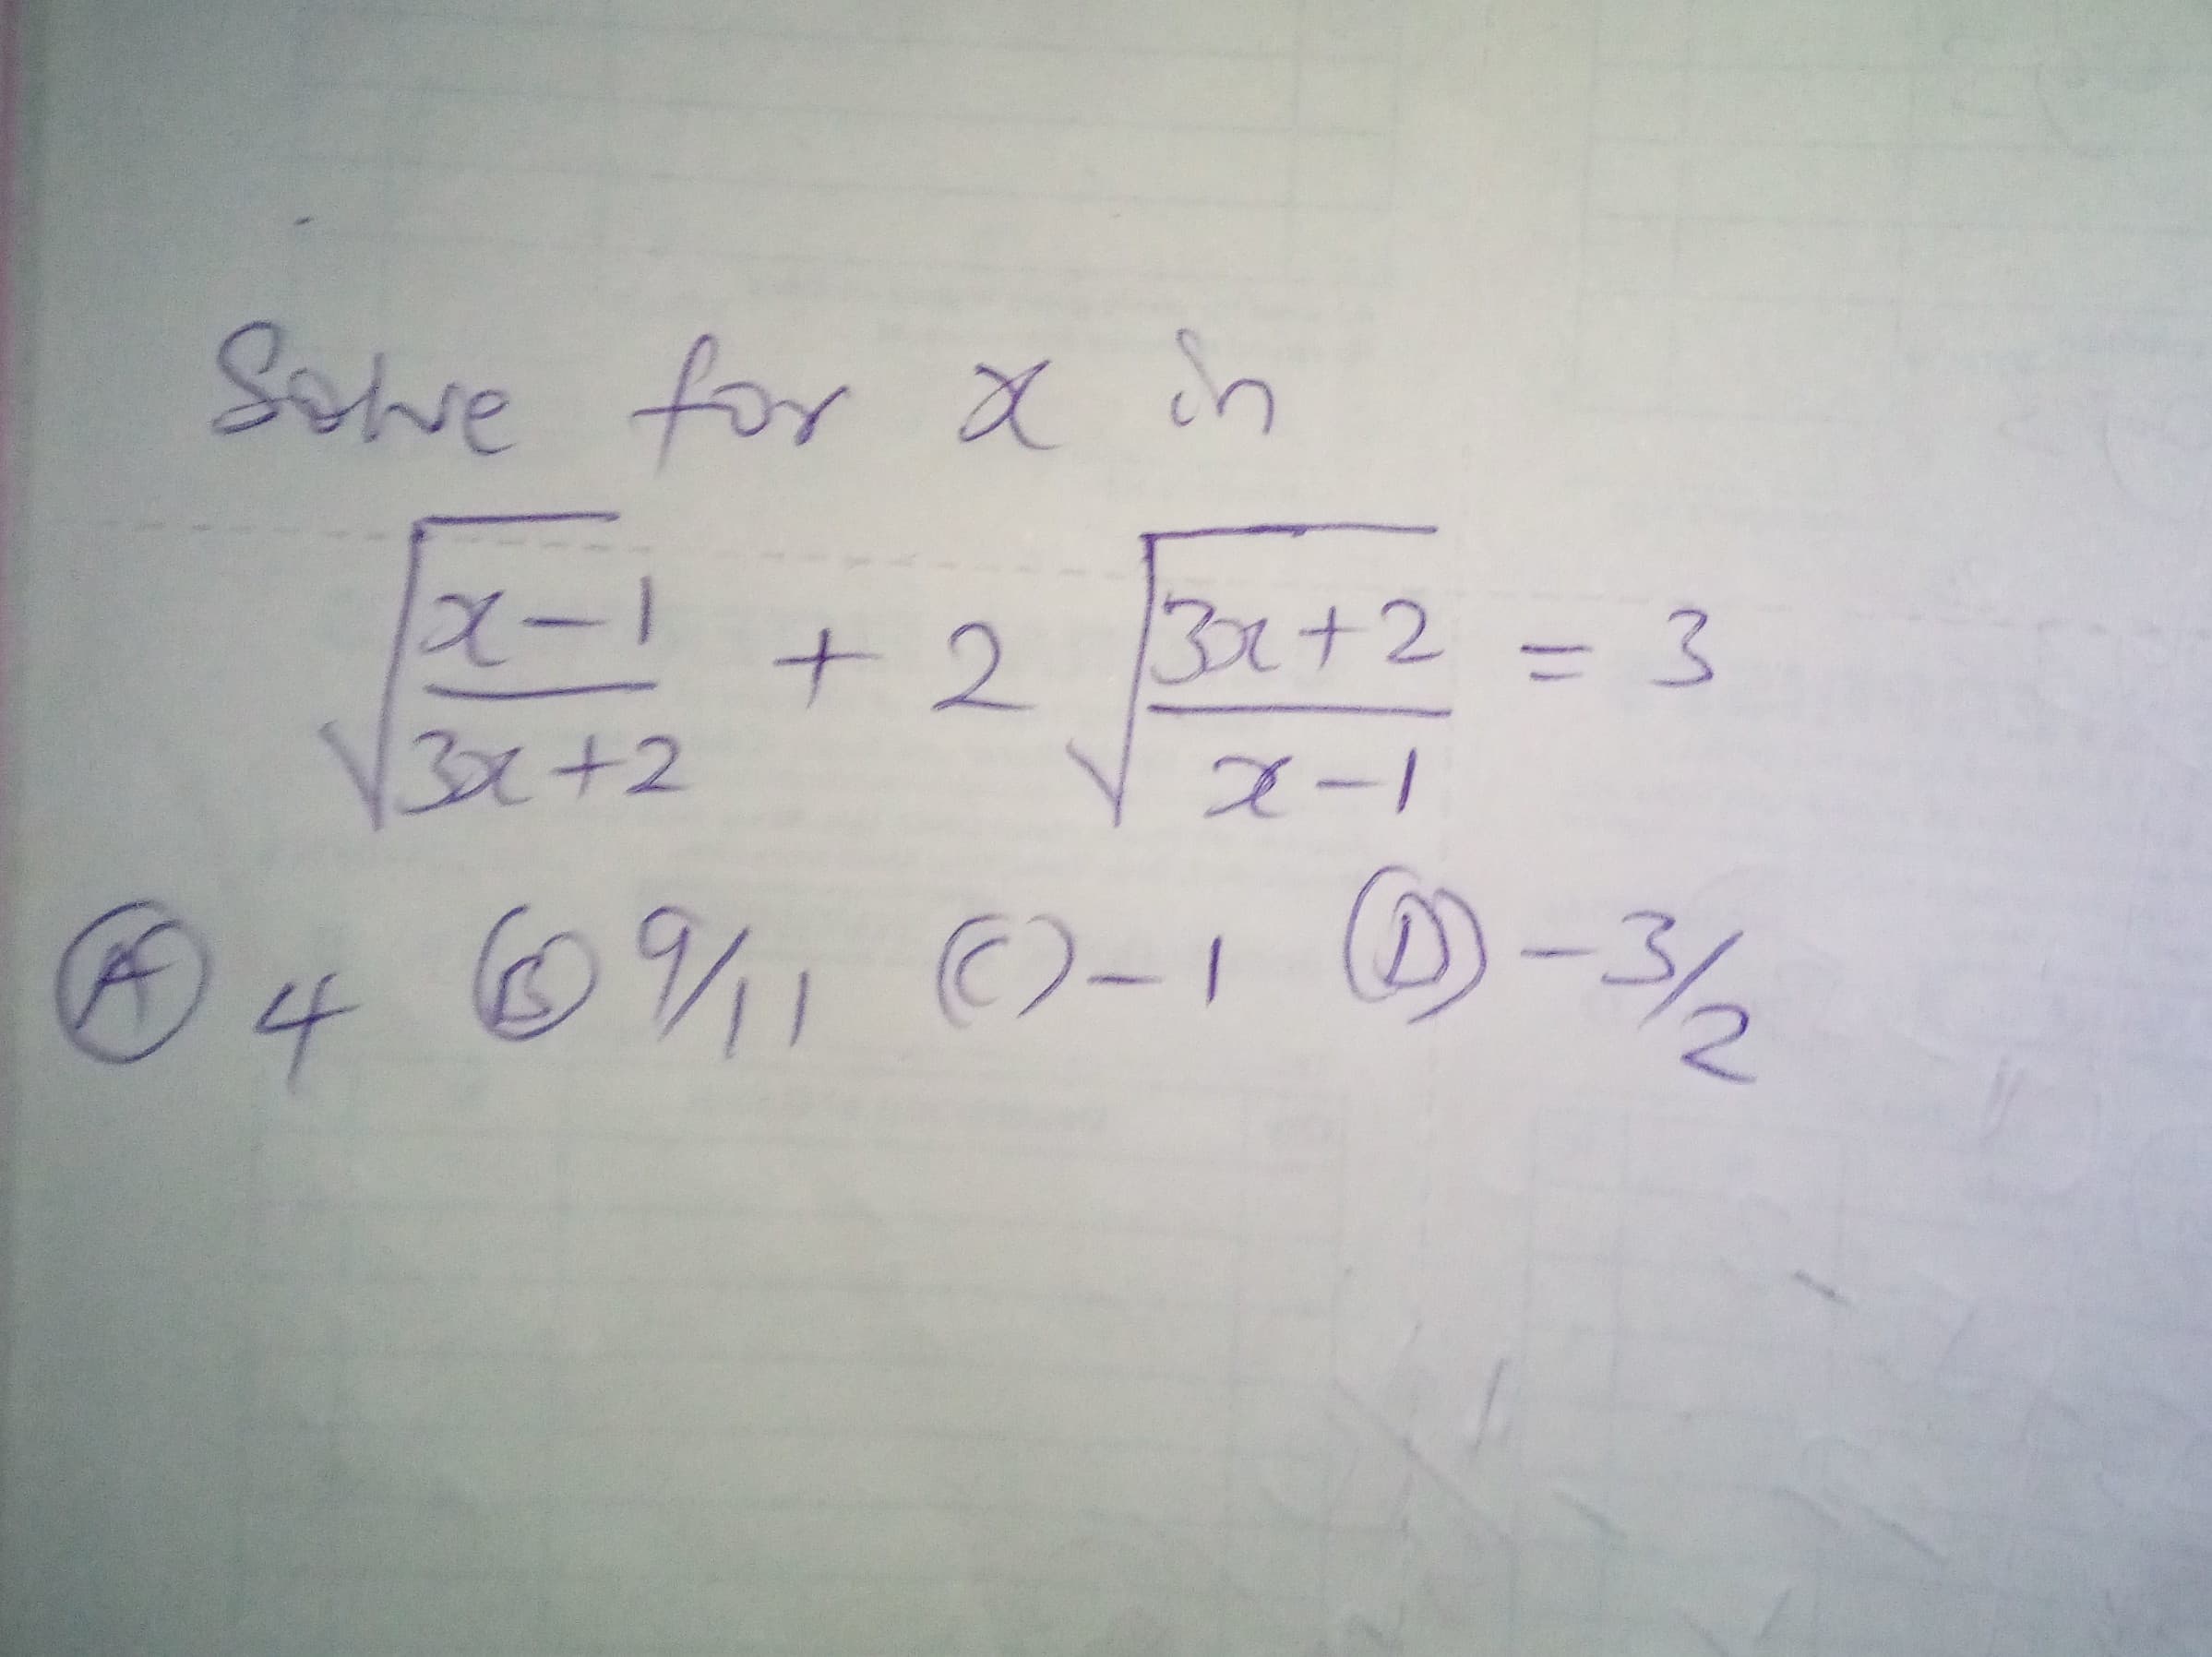 Solve for x in
30+2=D3
V3x+2
スー1
⑤ 4 ⑥%, の-1 ()-3
